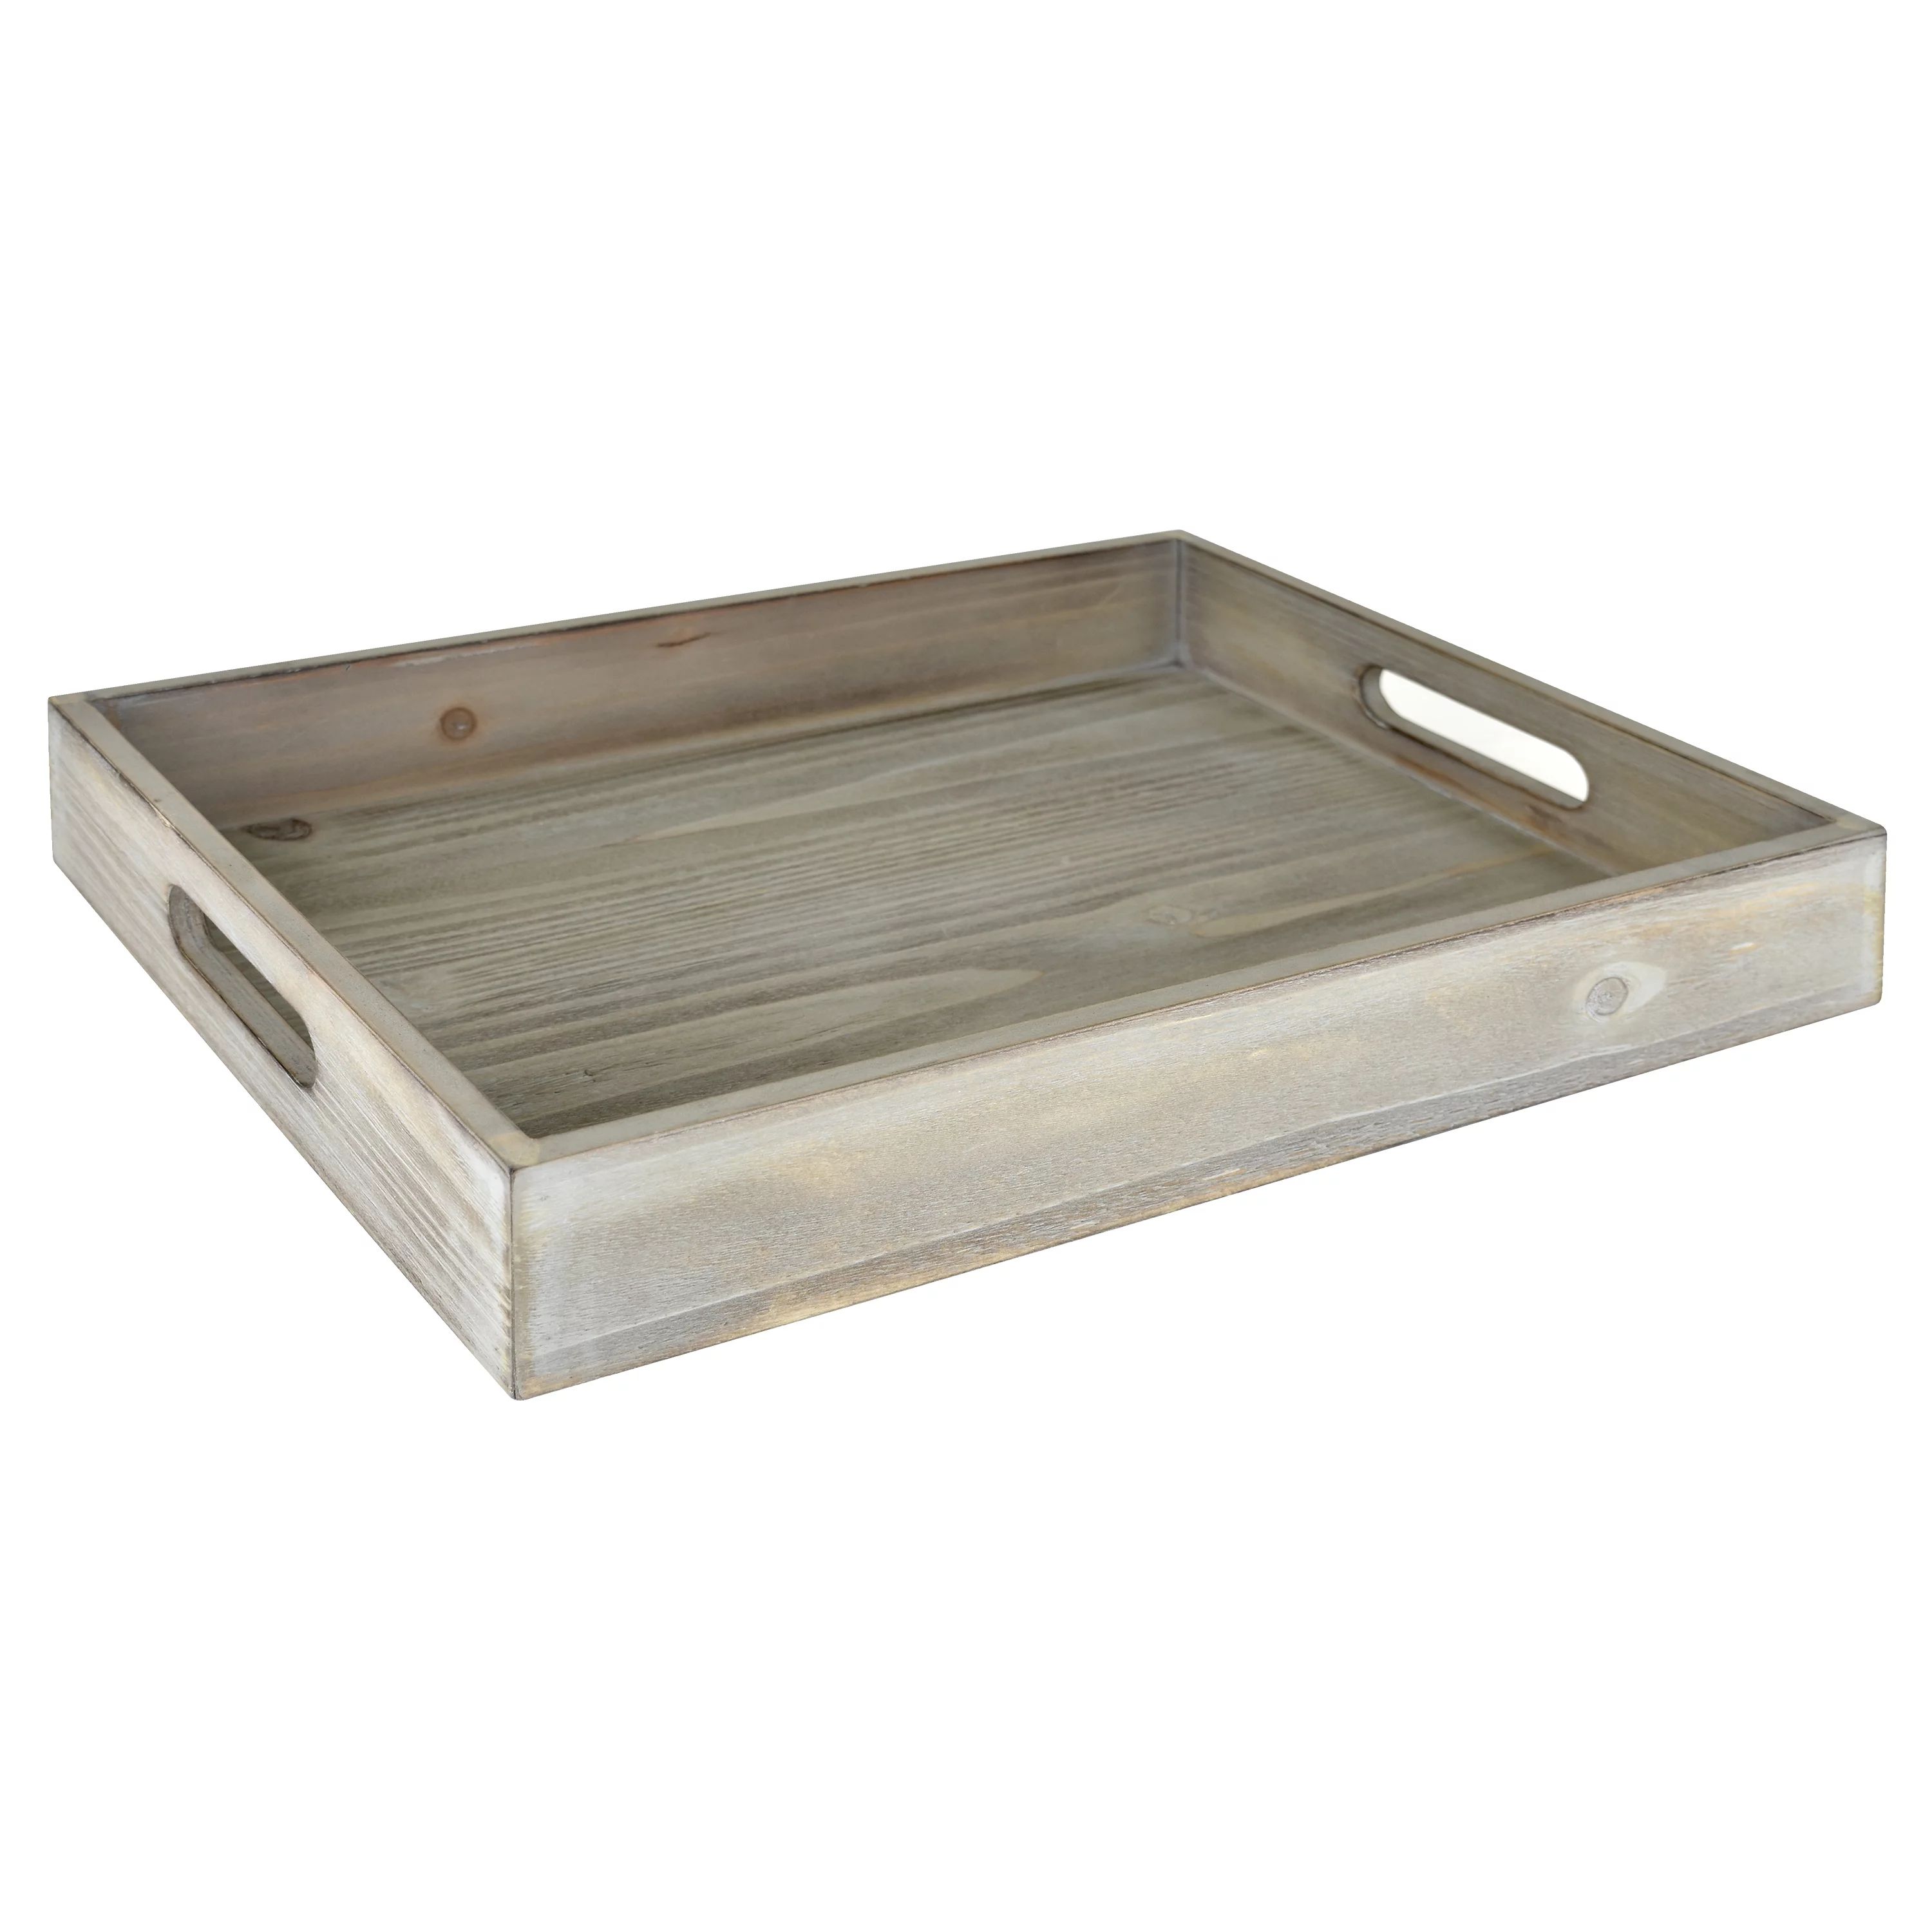 Better Homes & Gardens Tabletop Rectangle 16" x 12" x 2.5" Wooden Tray, Gray Wash | Walmart (US)